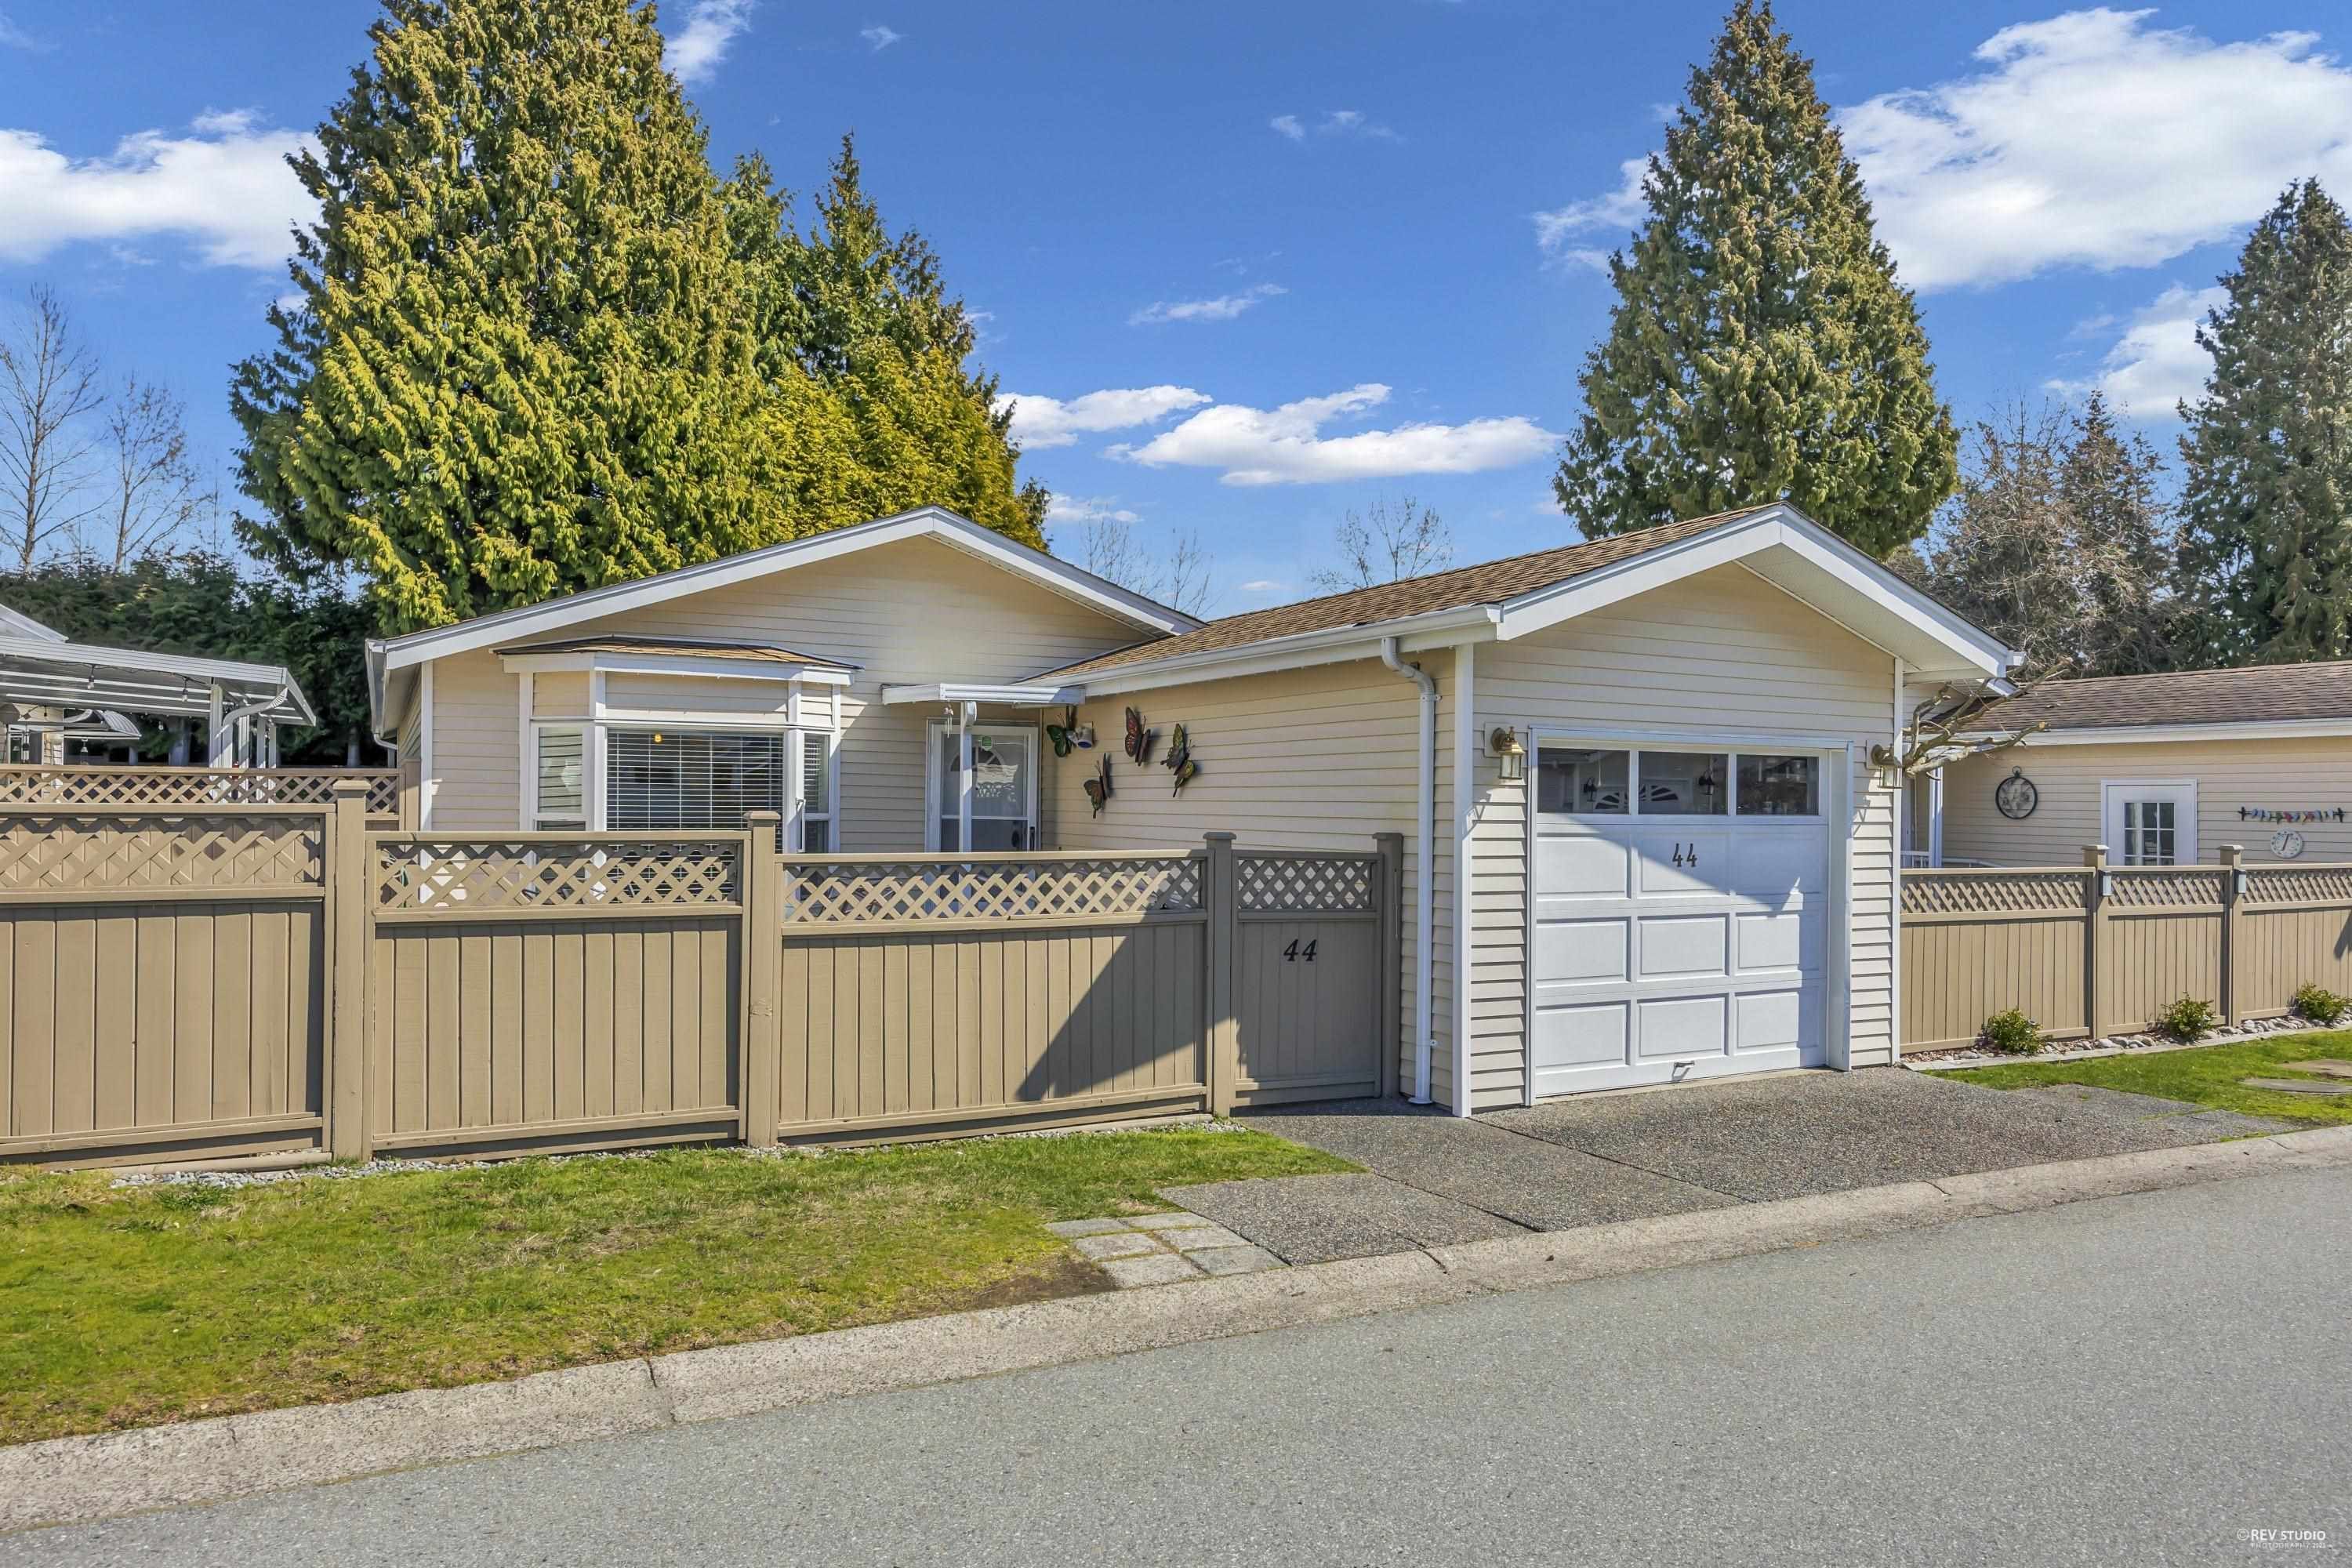 I have sold a property at 44 1400 164 ST in Surrey
